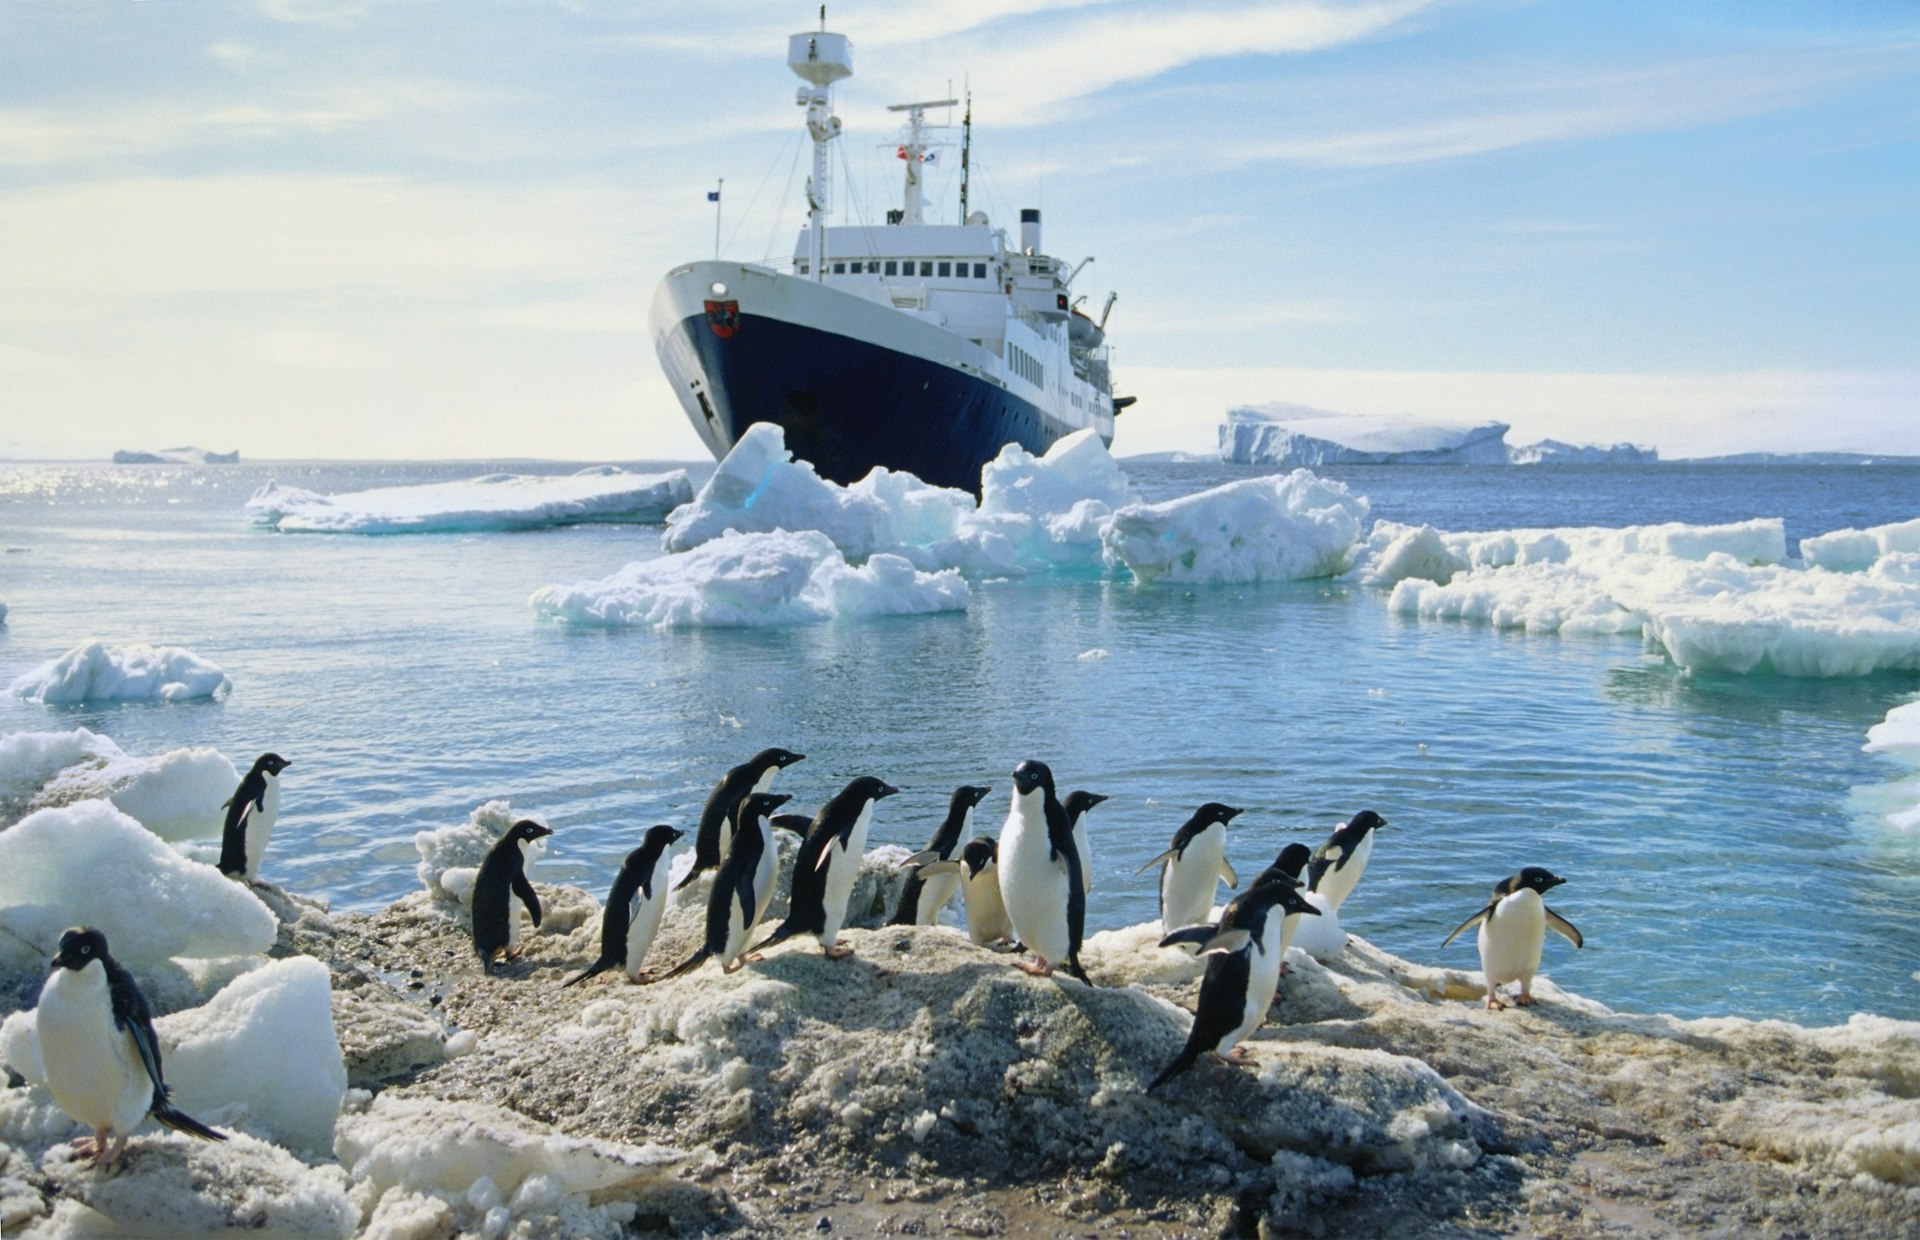 A group of penguins huddle on a patch of rock in Antarctica while a cruise ships looms large in the background. Both the ship and penguins are surrounded by icebergs.